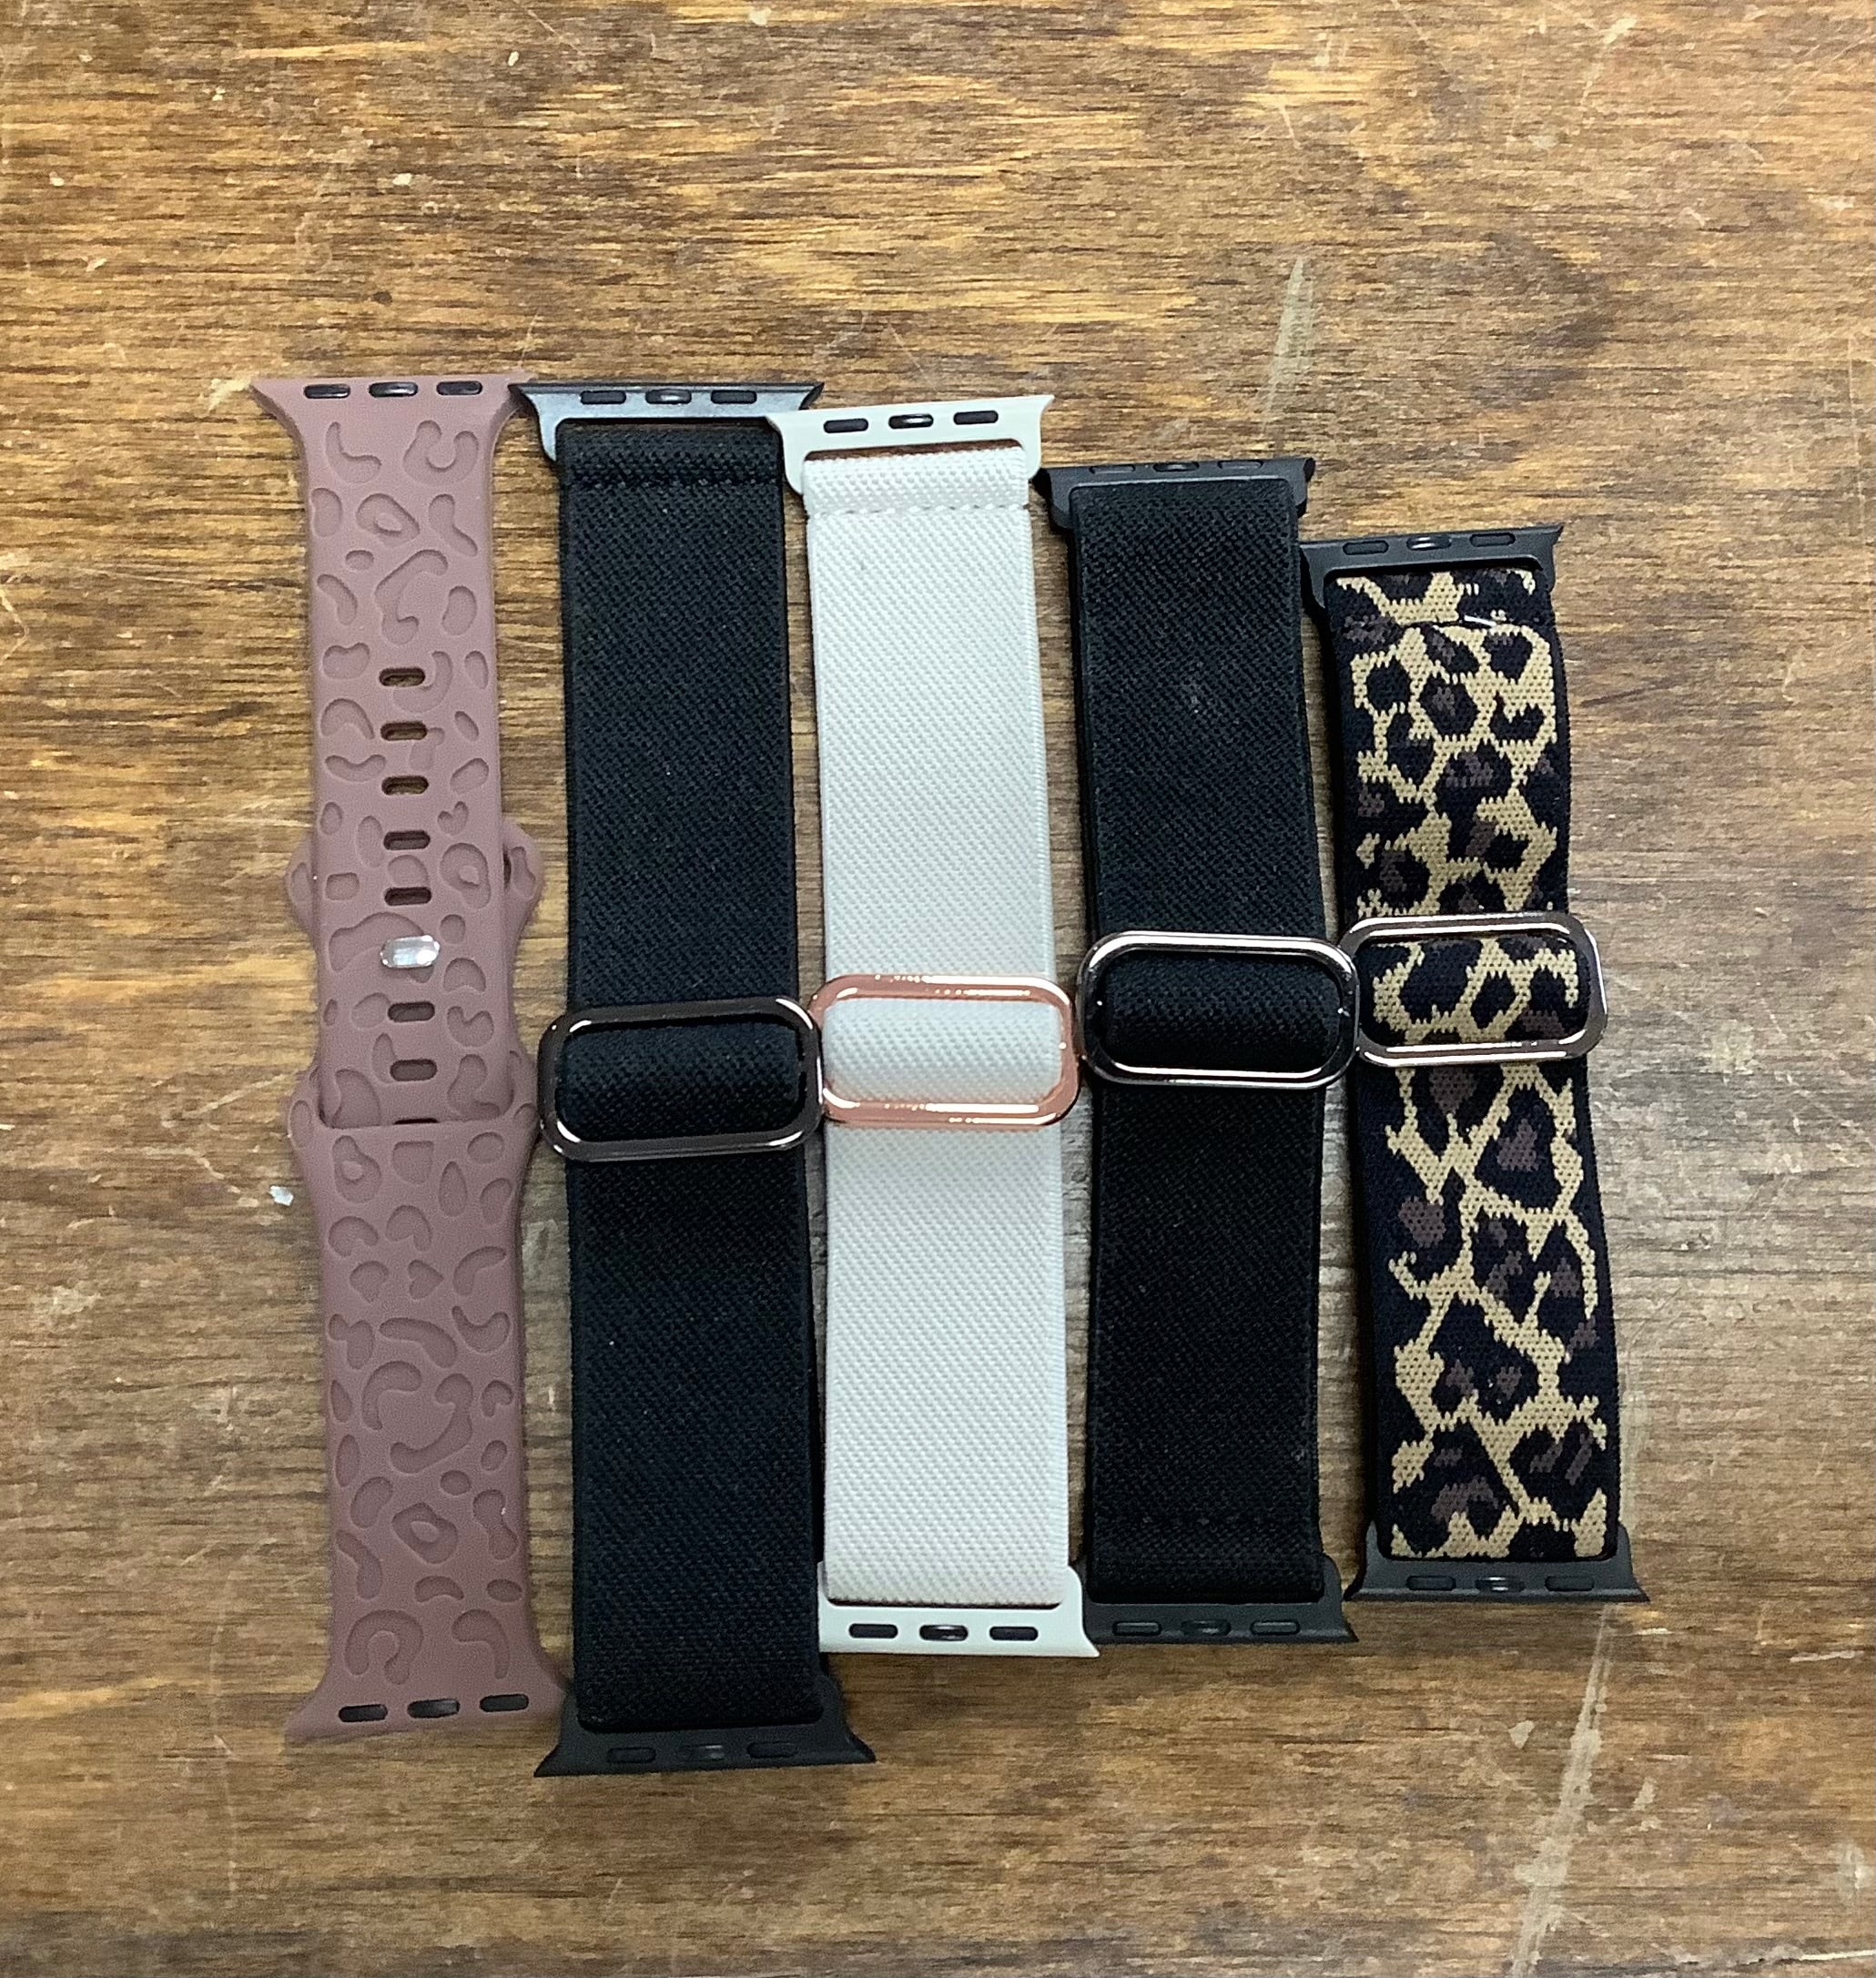 Watch Band and phone accessories